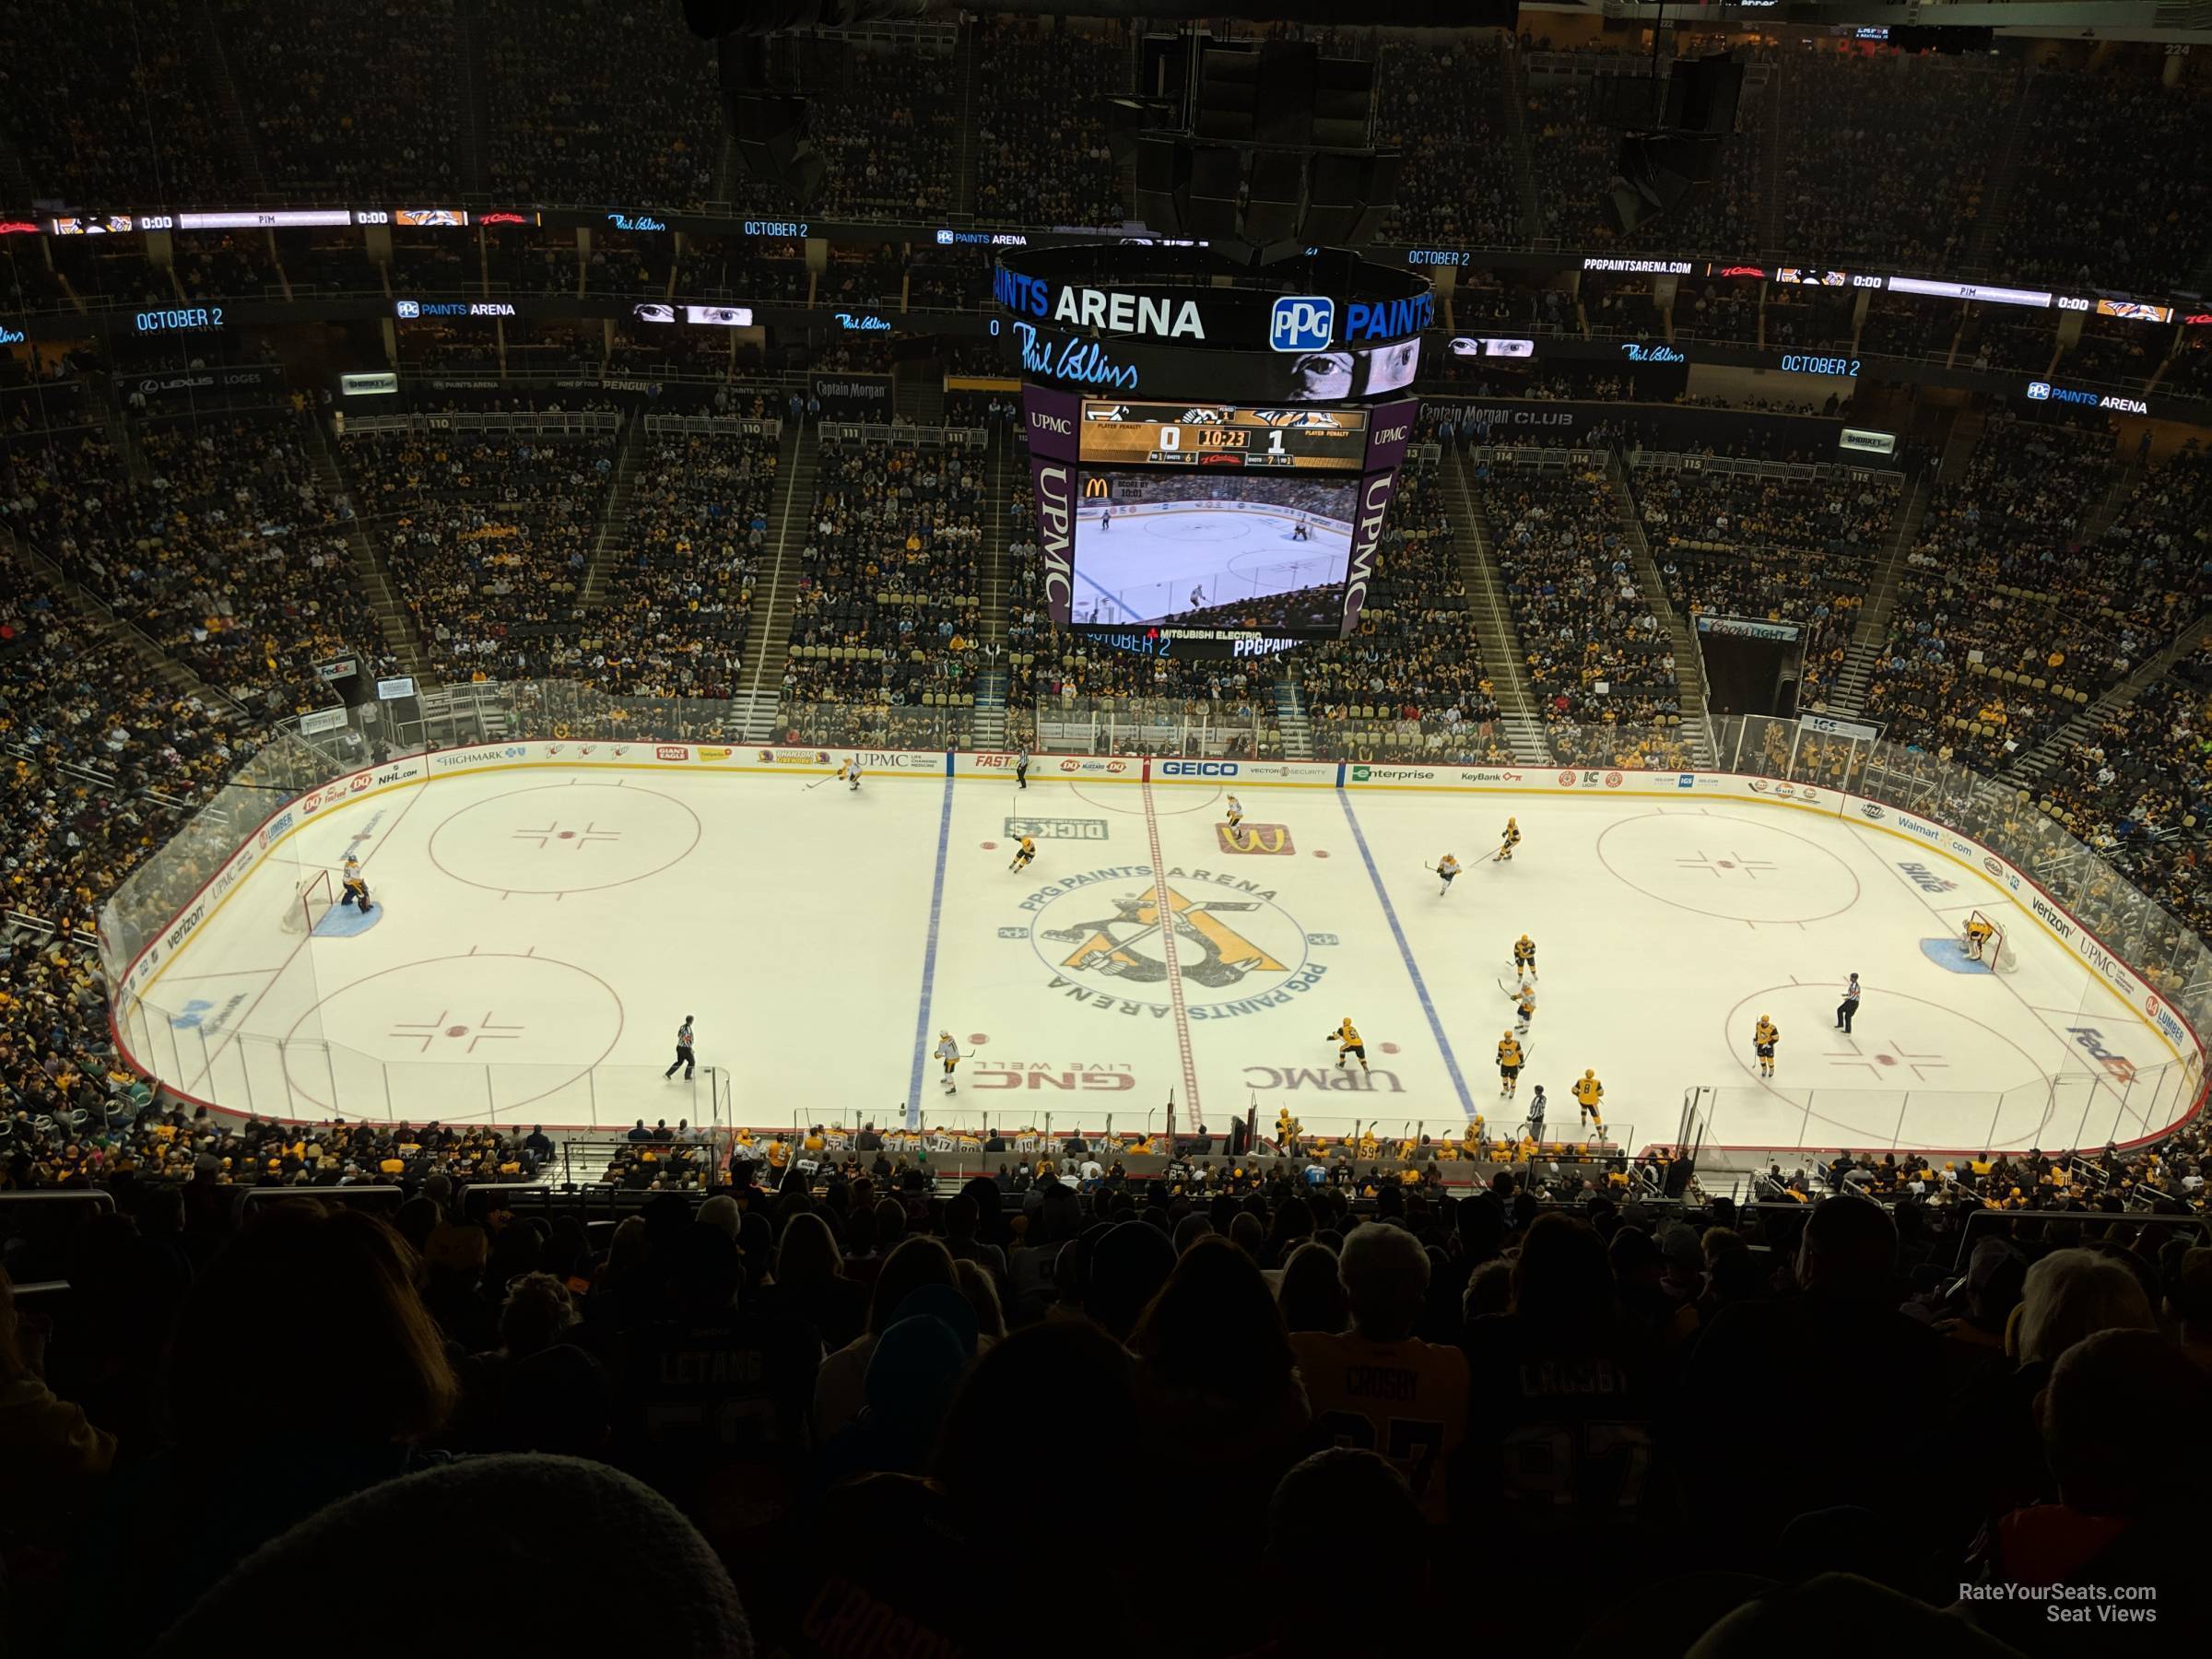 section 203, row sro seat view  for hockey - ppg paints arena